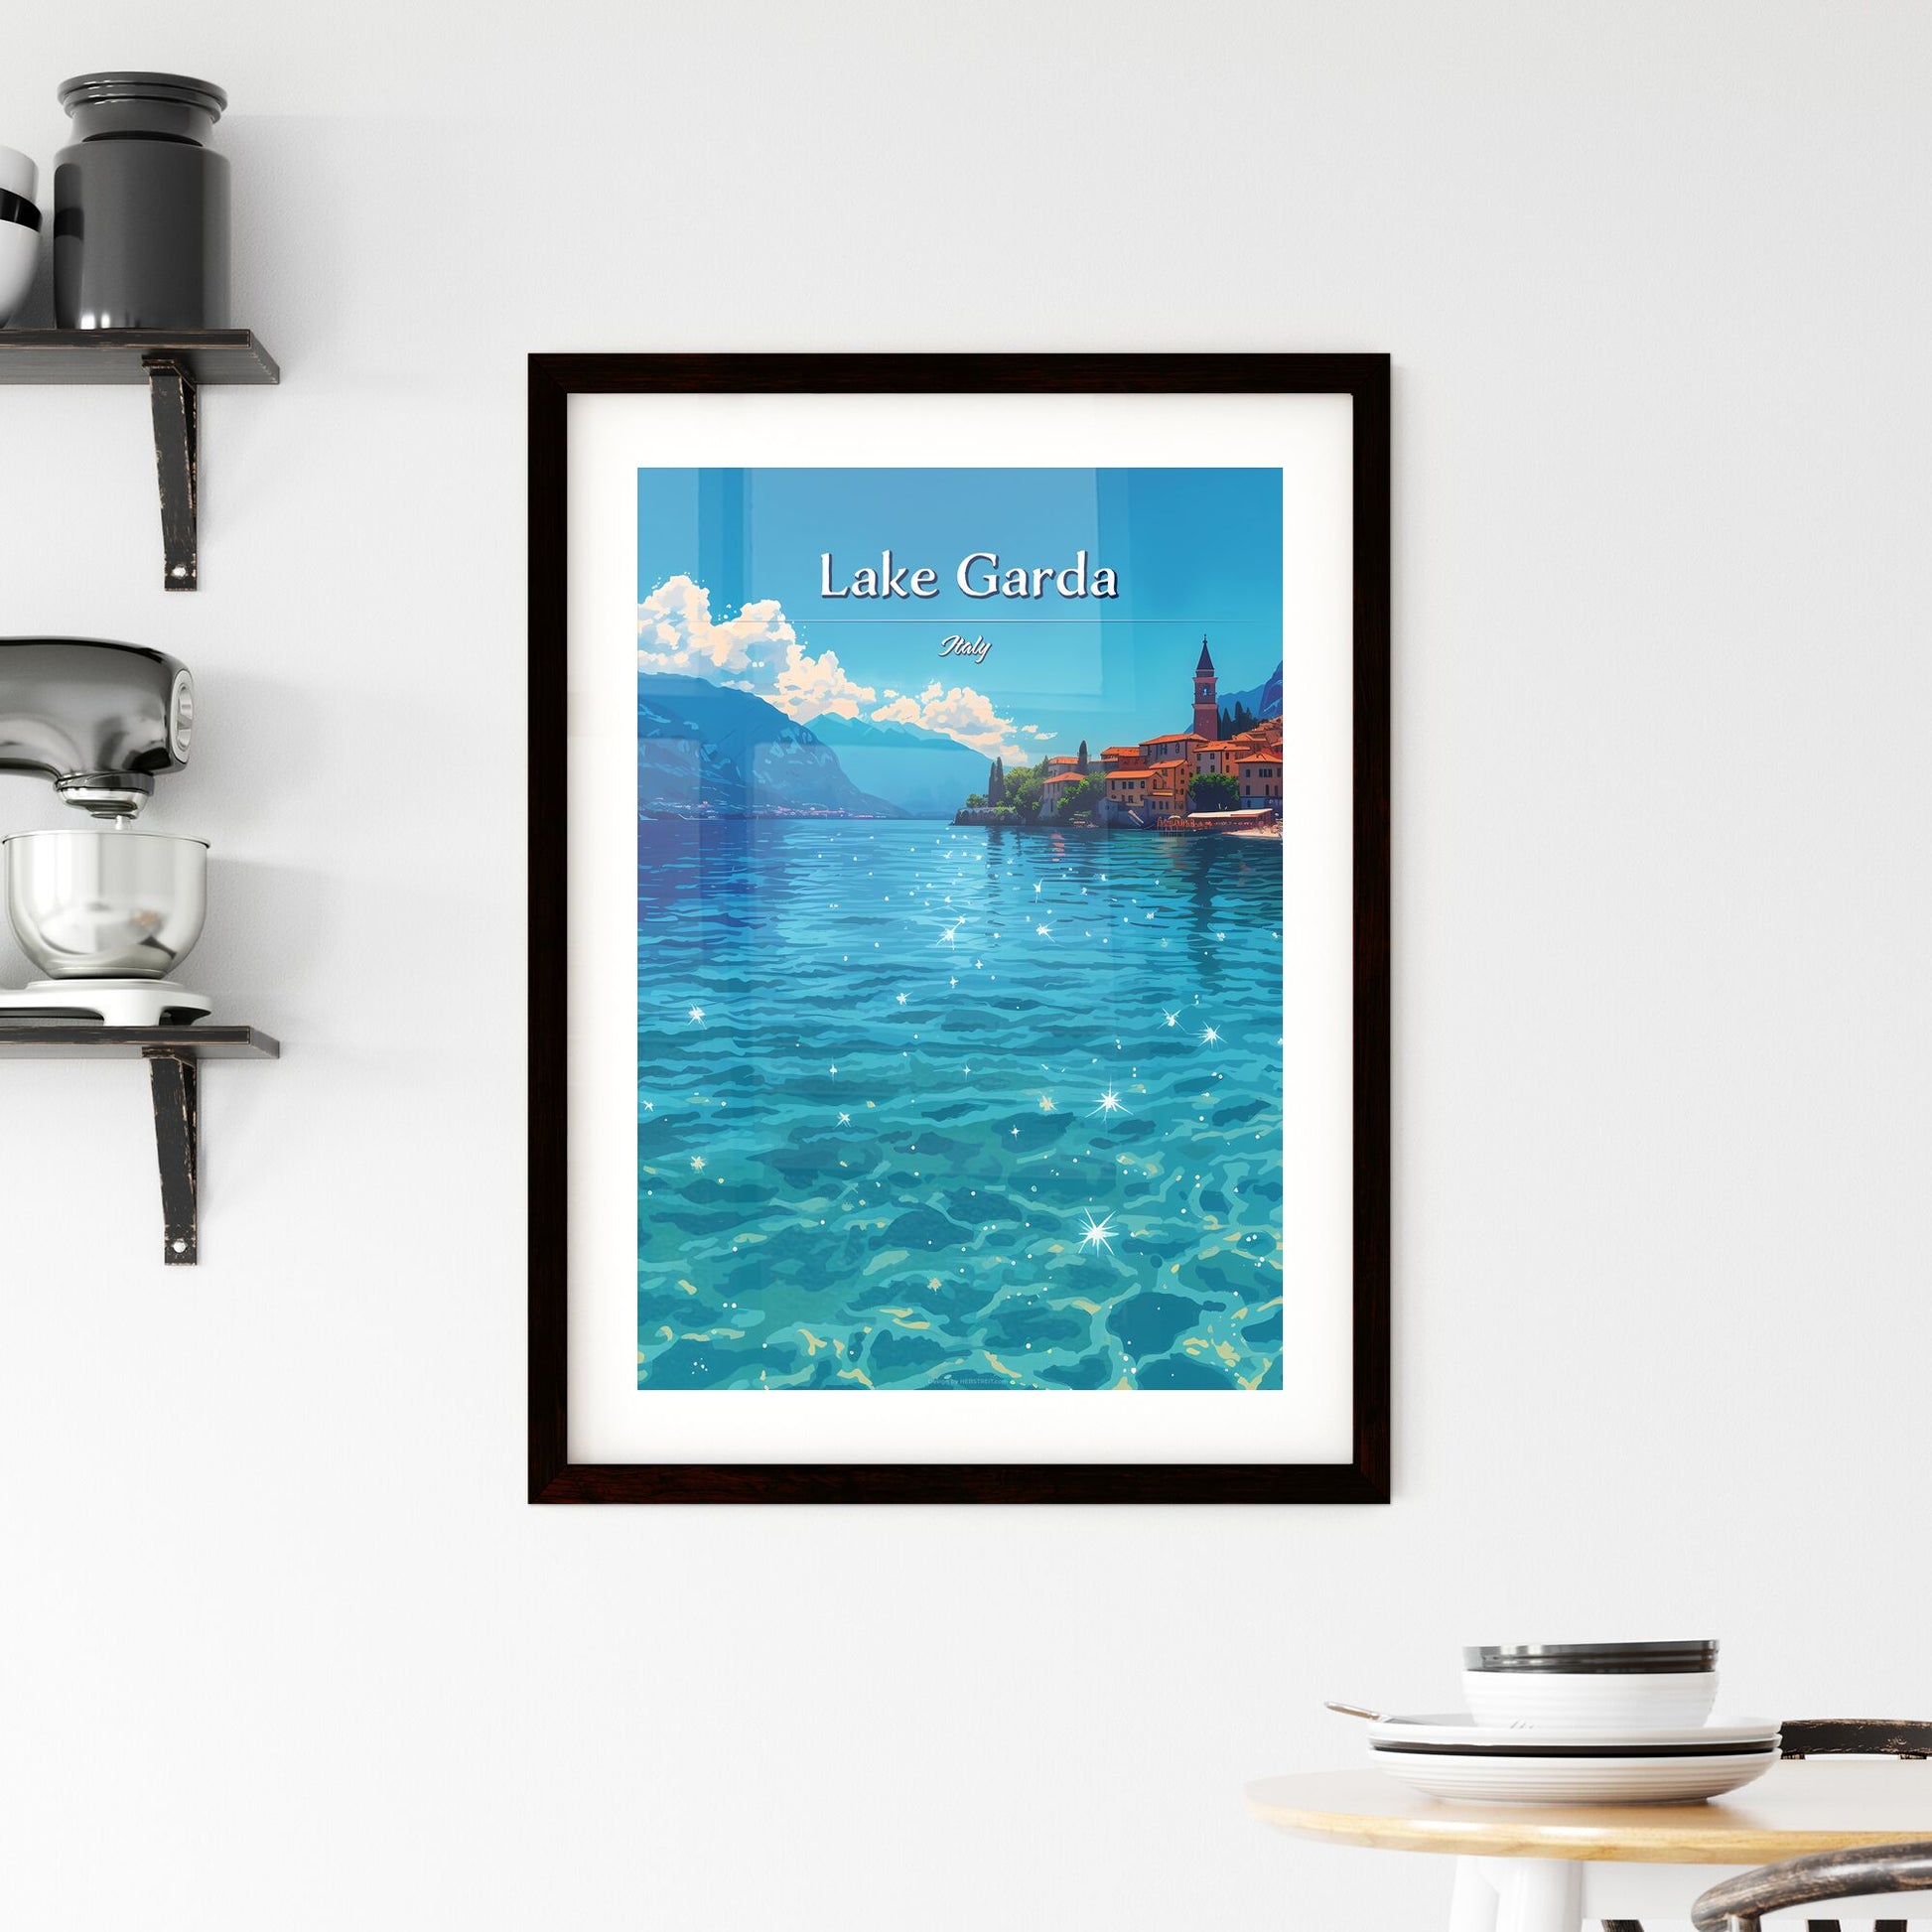 Lake Garda, Italy - Art print of a woman wearing a swimsuit and hat Default Title